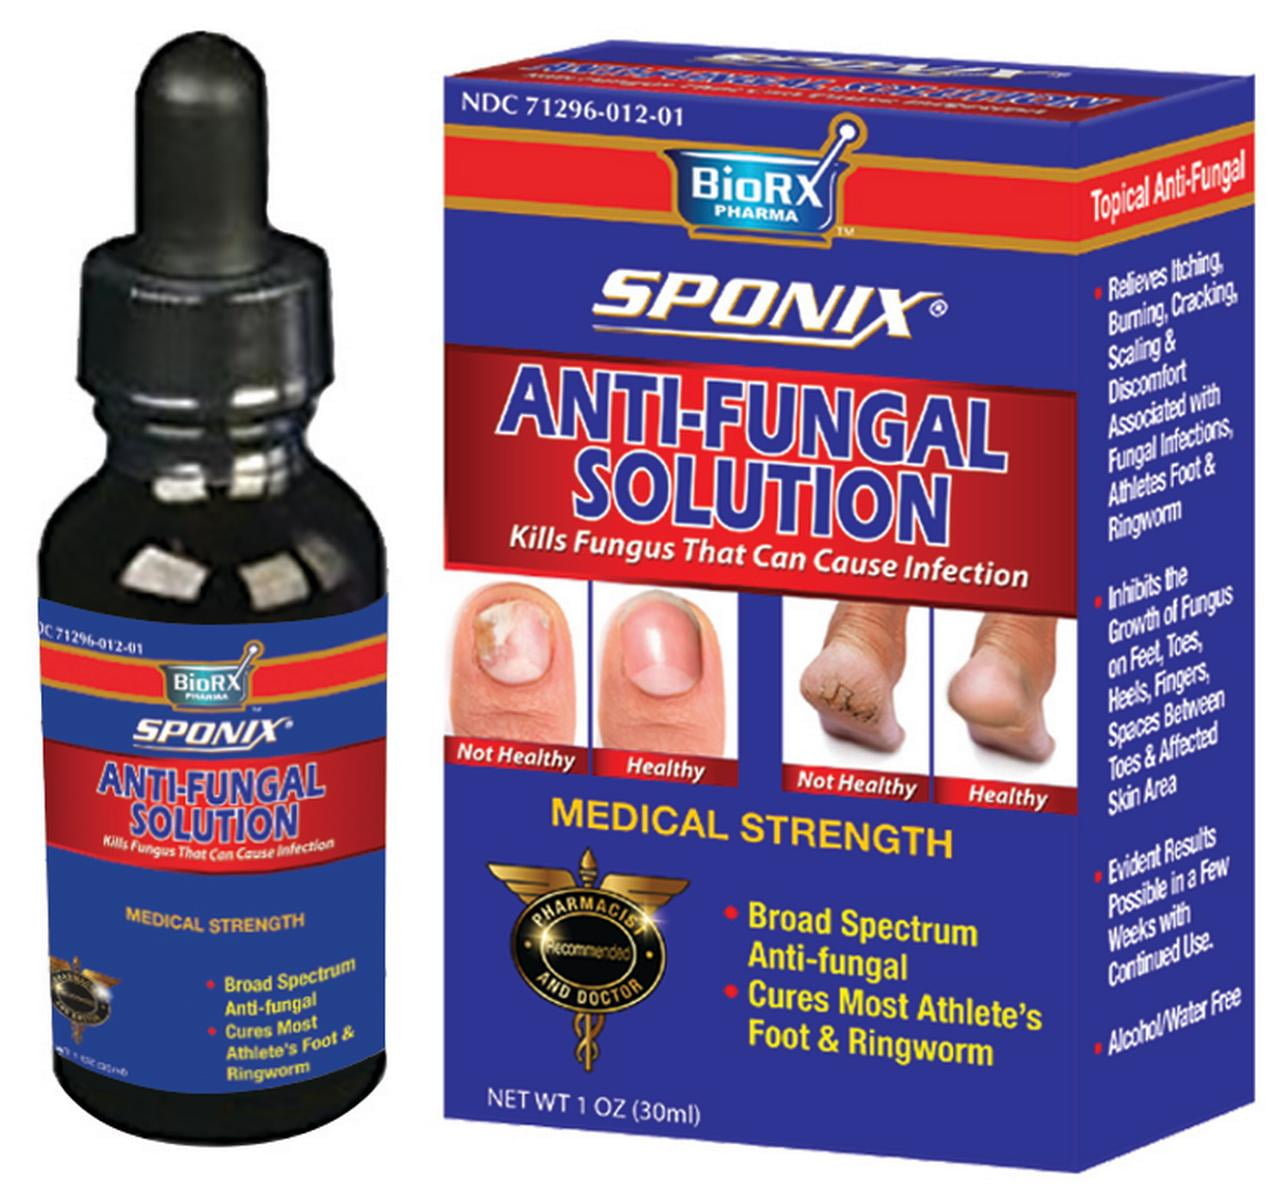 Antifungal tablets for ringworm